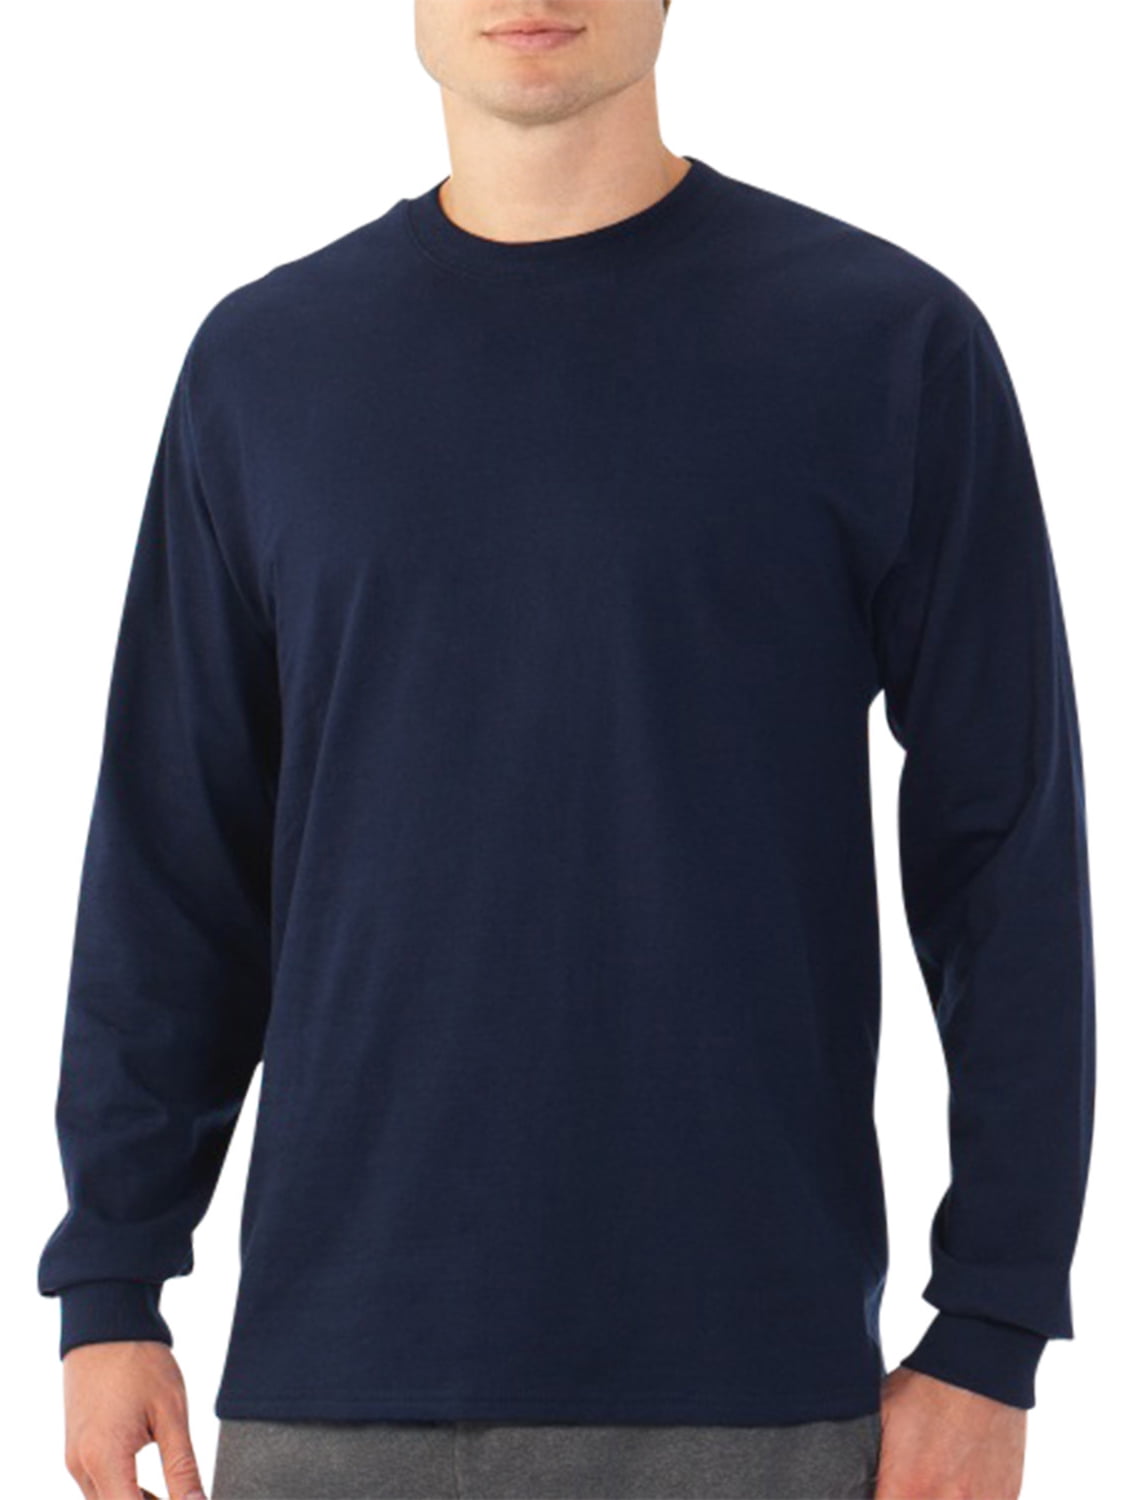 Fruit of the Loom Mens Long Sleeve Cotton T-Shirt 